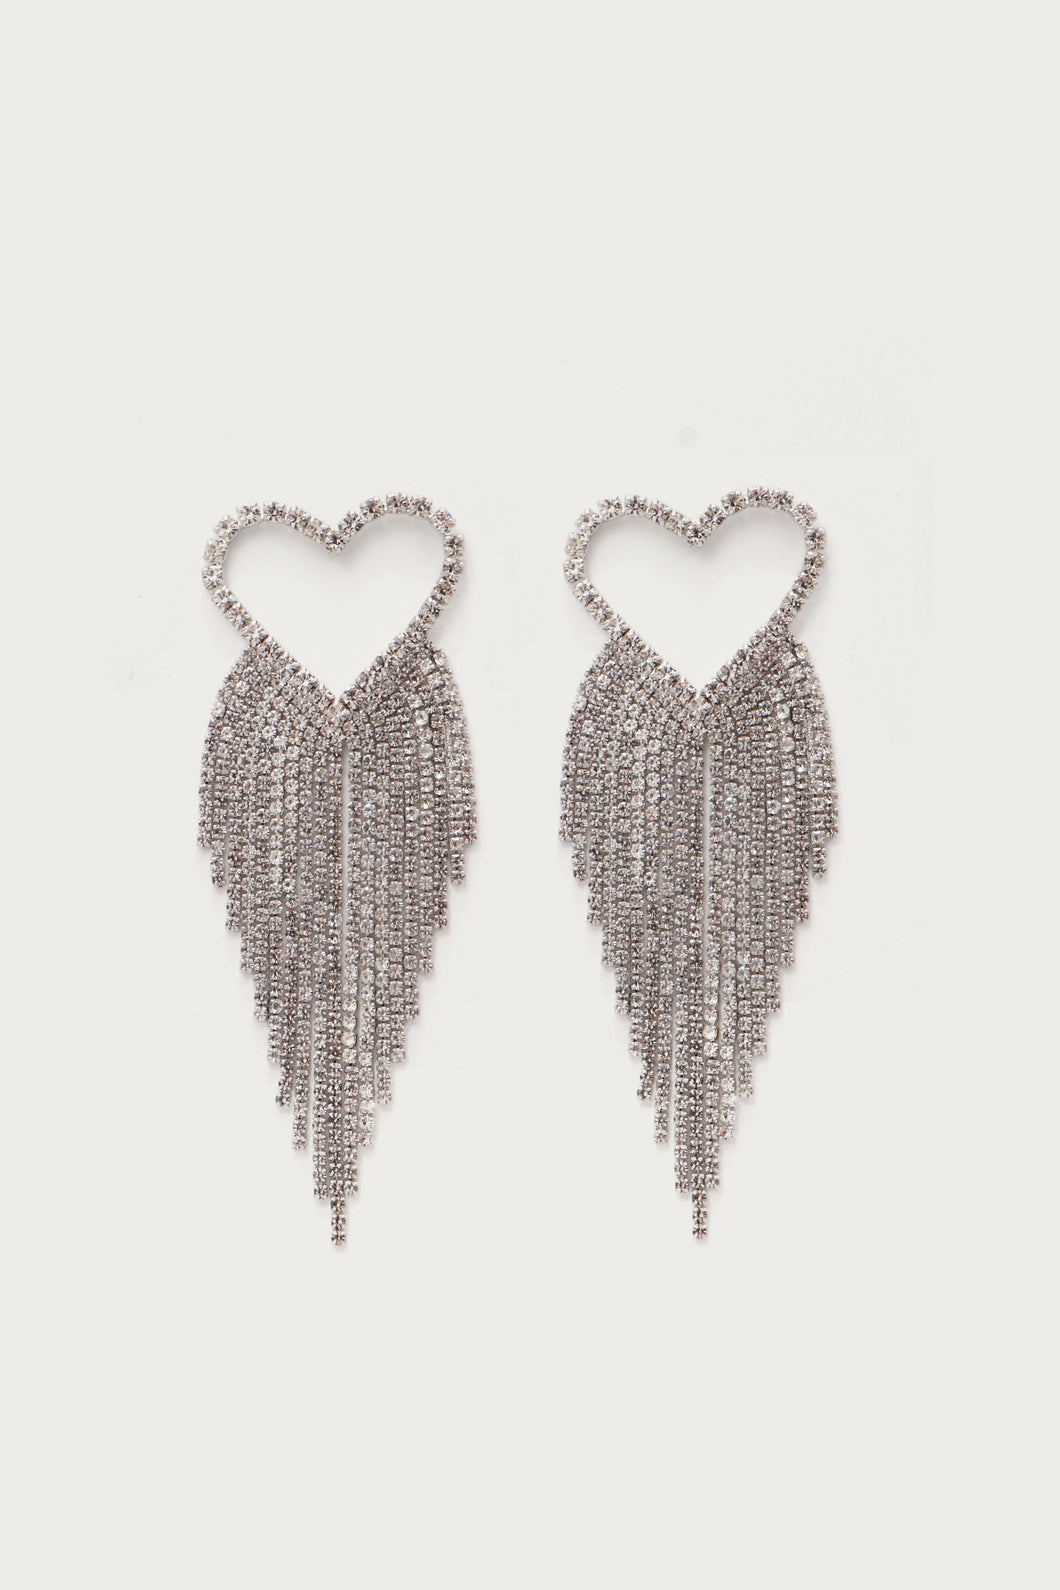 Elevate your style with our Silver Crystal Heart Tassel Earrings, the epitome of glamour and sophistication. These statement earrings effortlessly blend timeless elegance with contemporary flair, featuring a stunning heart-shaped crystal with delicate silver crystal chains. The intricate tassel design adds movement and allure, ensuring you stand out on any occasion. Make a bold statement and adorn yourself with these exquisite earrings.